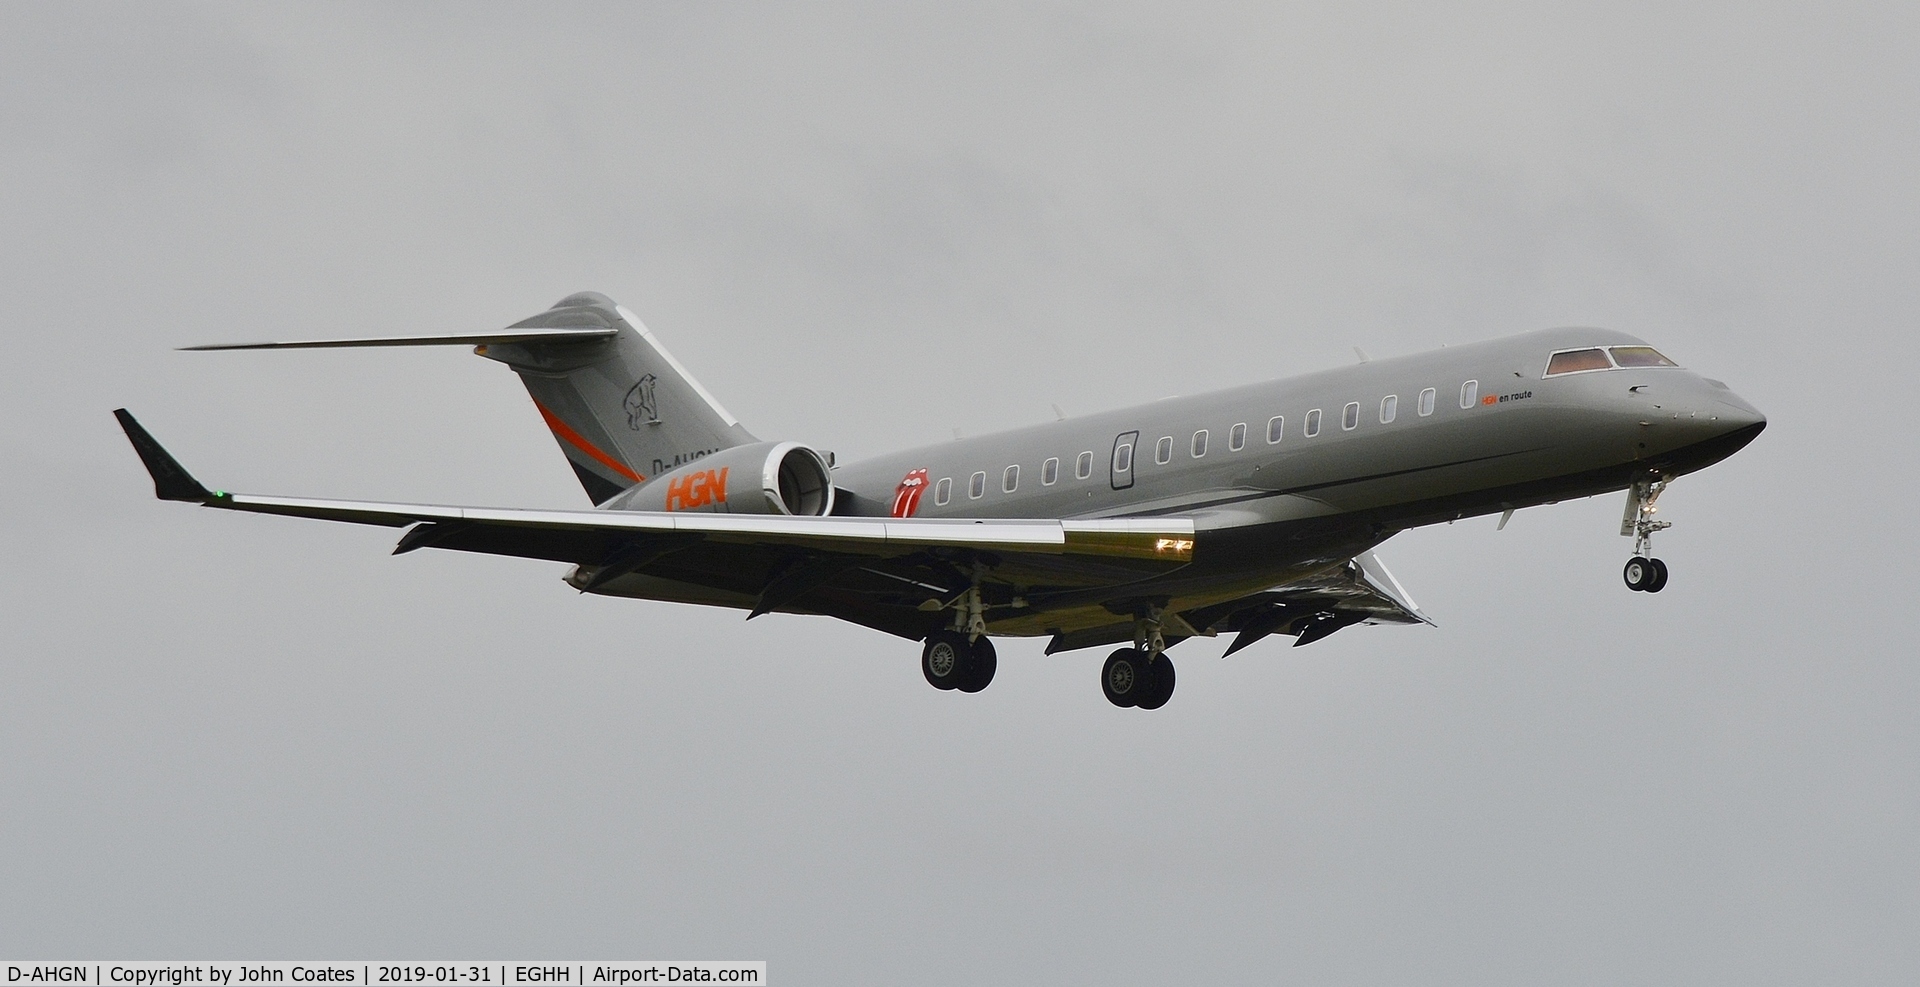 D-AHGN, 2021 Bombardier BD-700-2A12 Global 7500 C/N 70094, Approach to 08